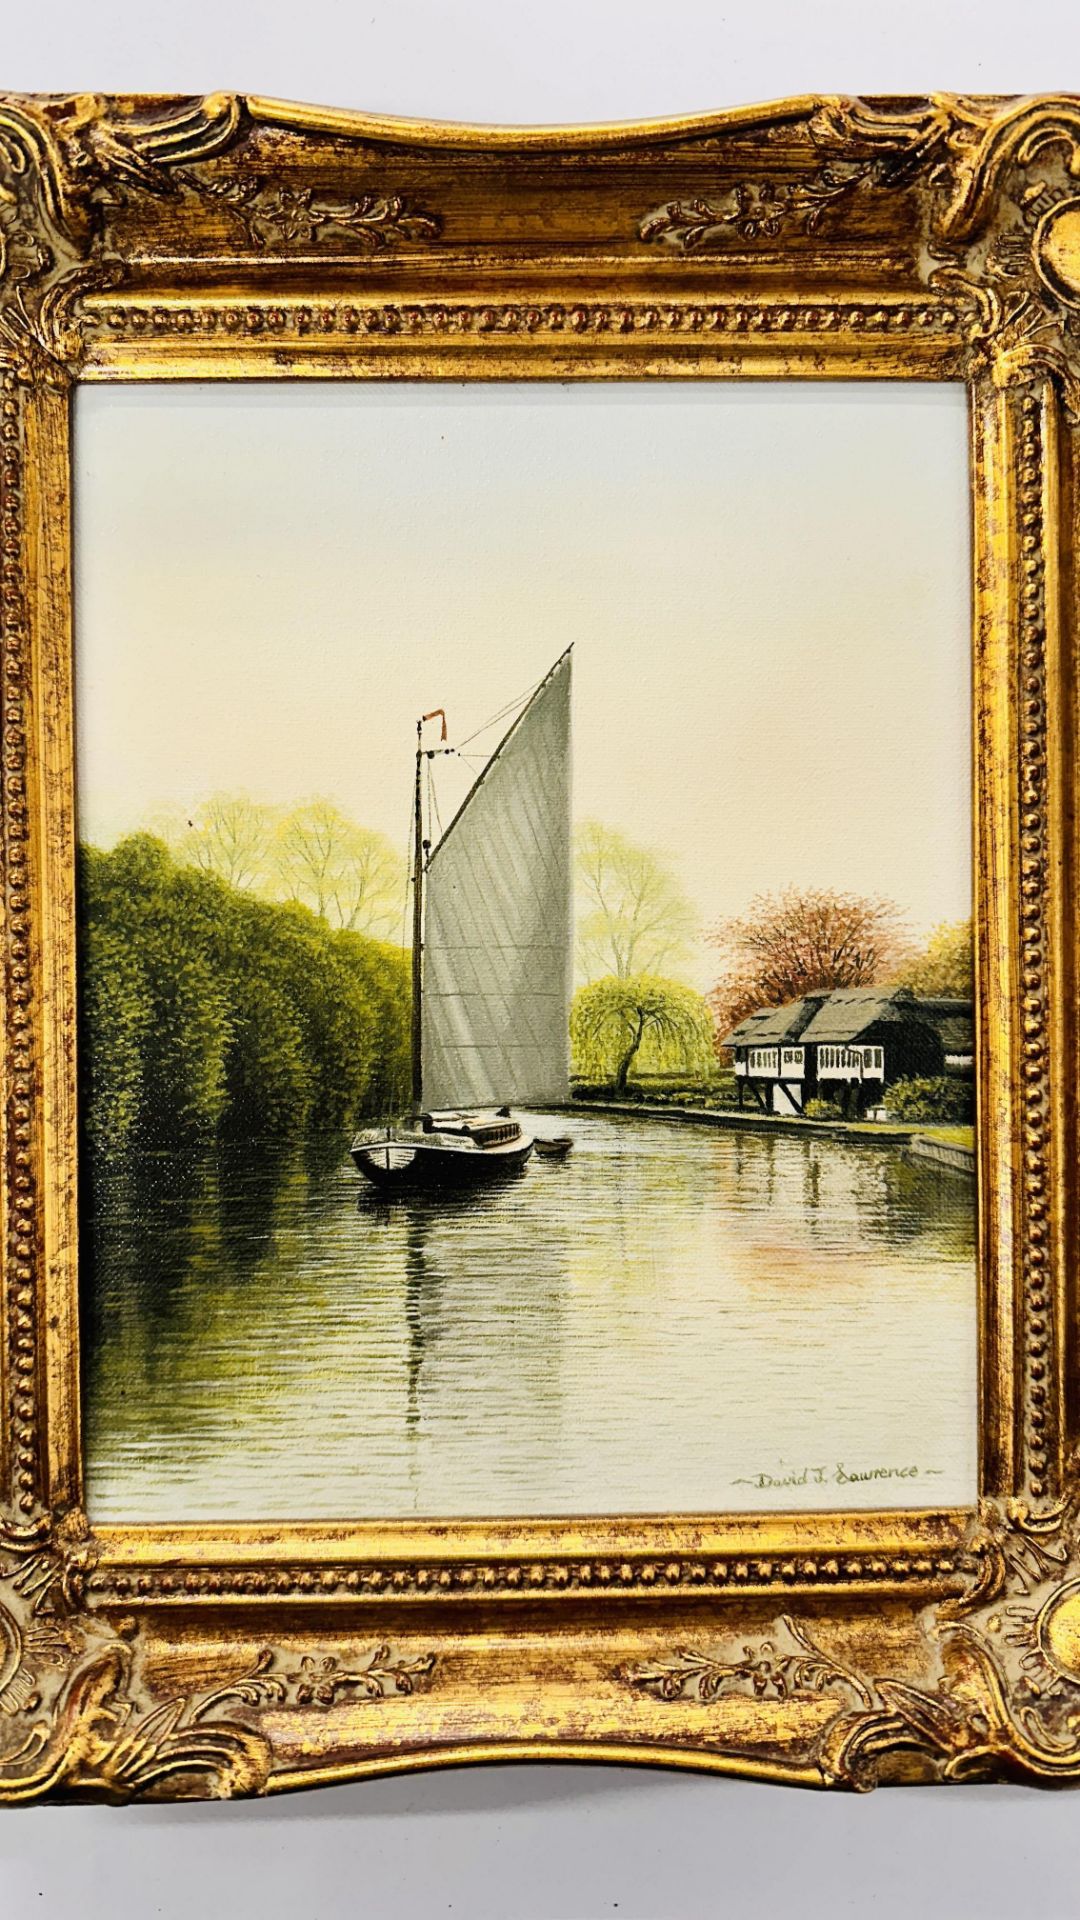 OIL ON CANVAS "SERENITY" WHERRY AT IRSTEAD BEARING SIGNATURE DAVID J. - Image 2 of 6